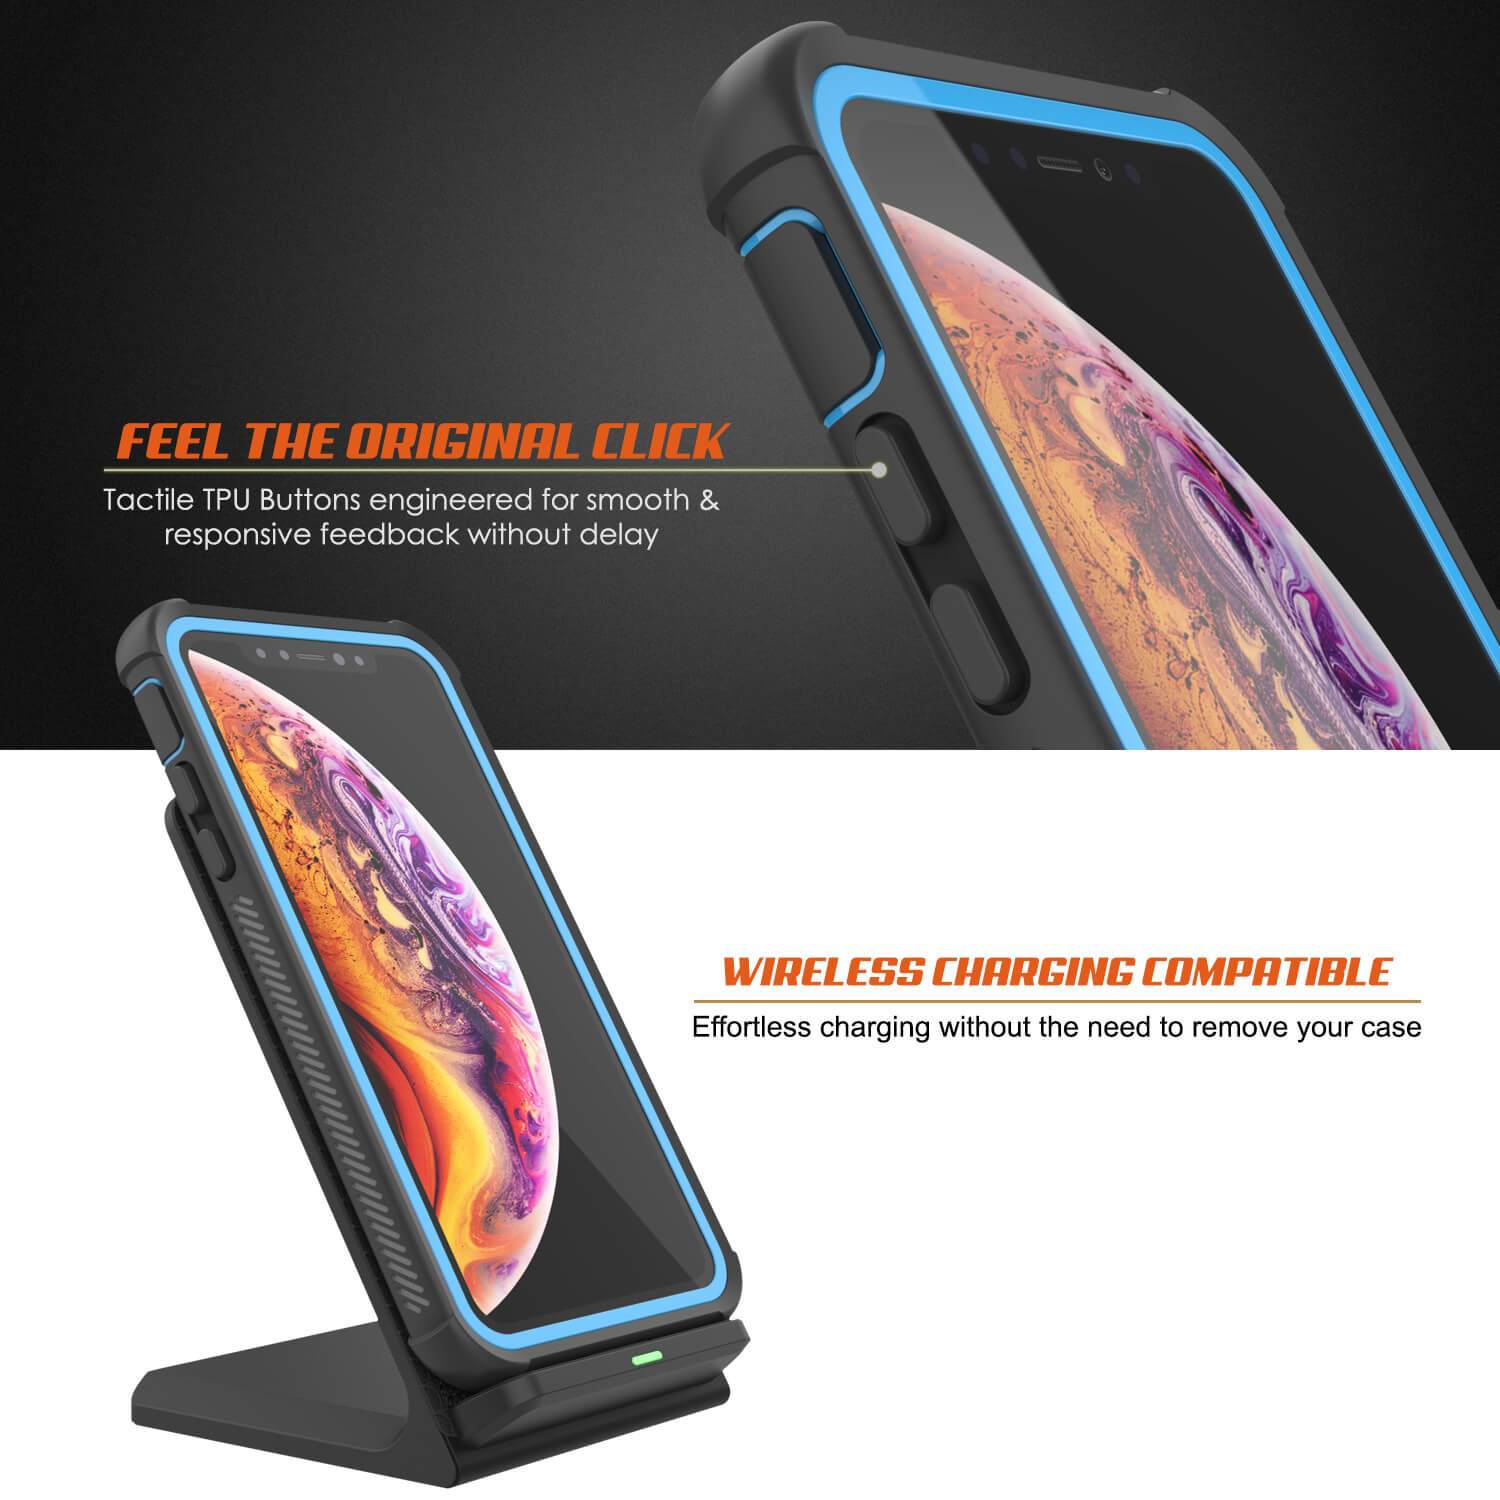 PunkCase iPhone XS Case, [Spartan Series] Clear Rugged Heavy Duty Cover W/Built in Screen Protector [Light-Blue]